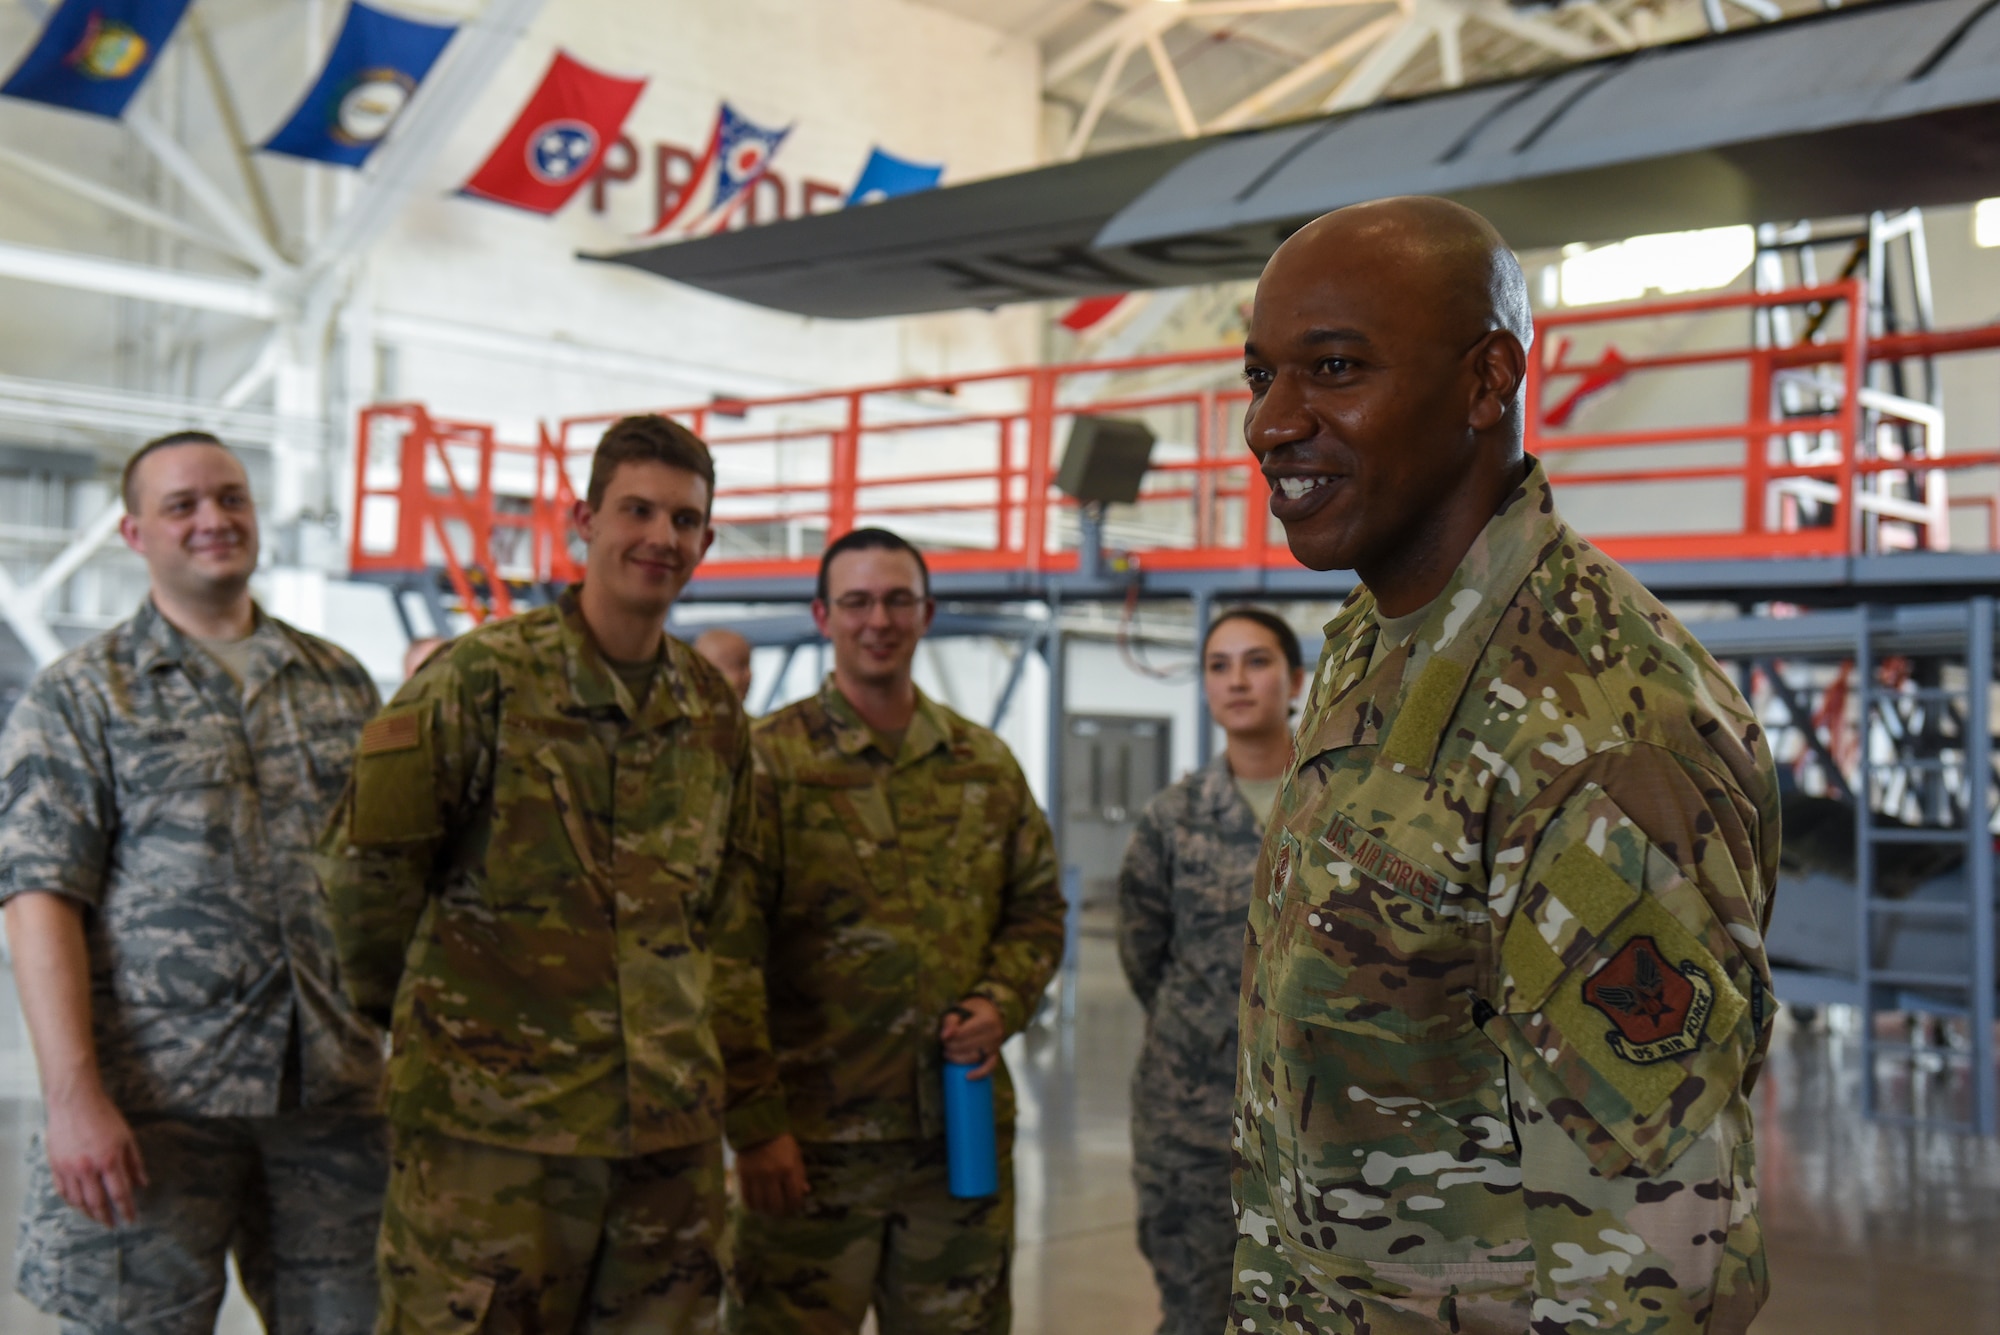 Chief Wright speaks to Airmen in a hangar